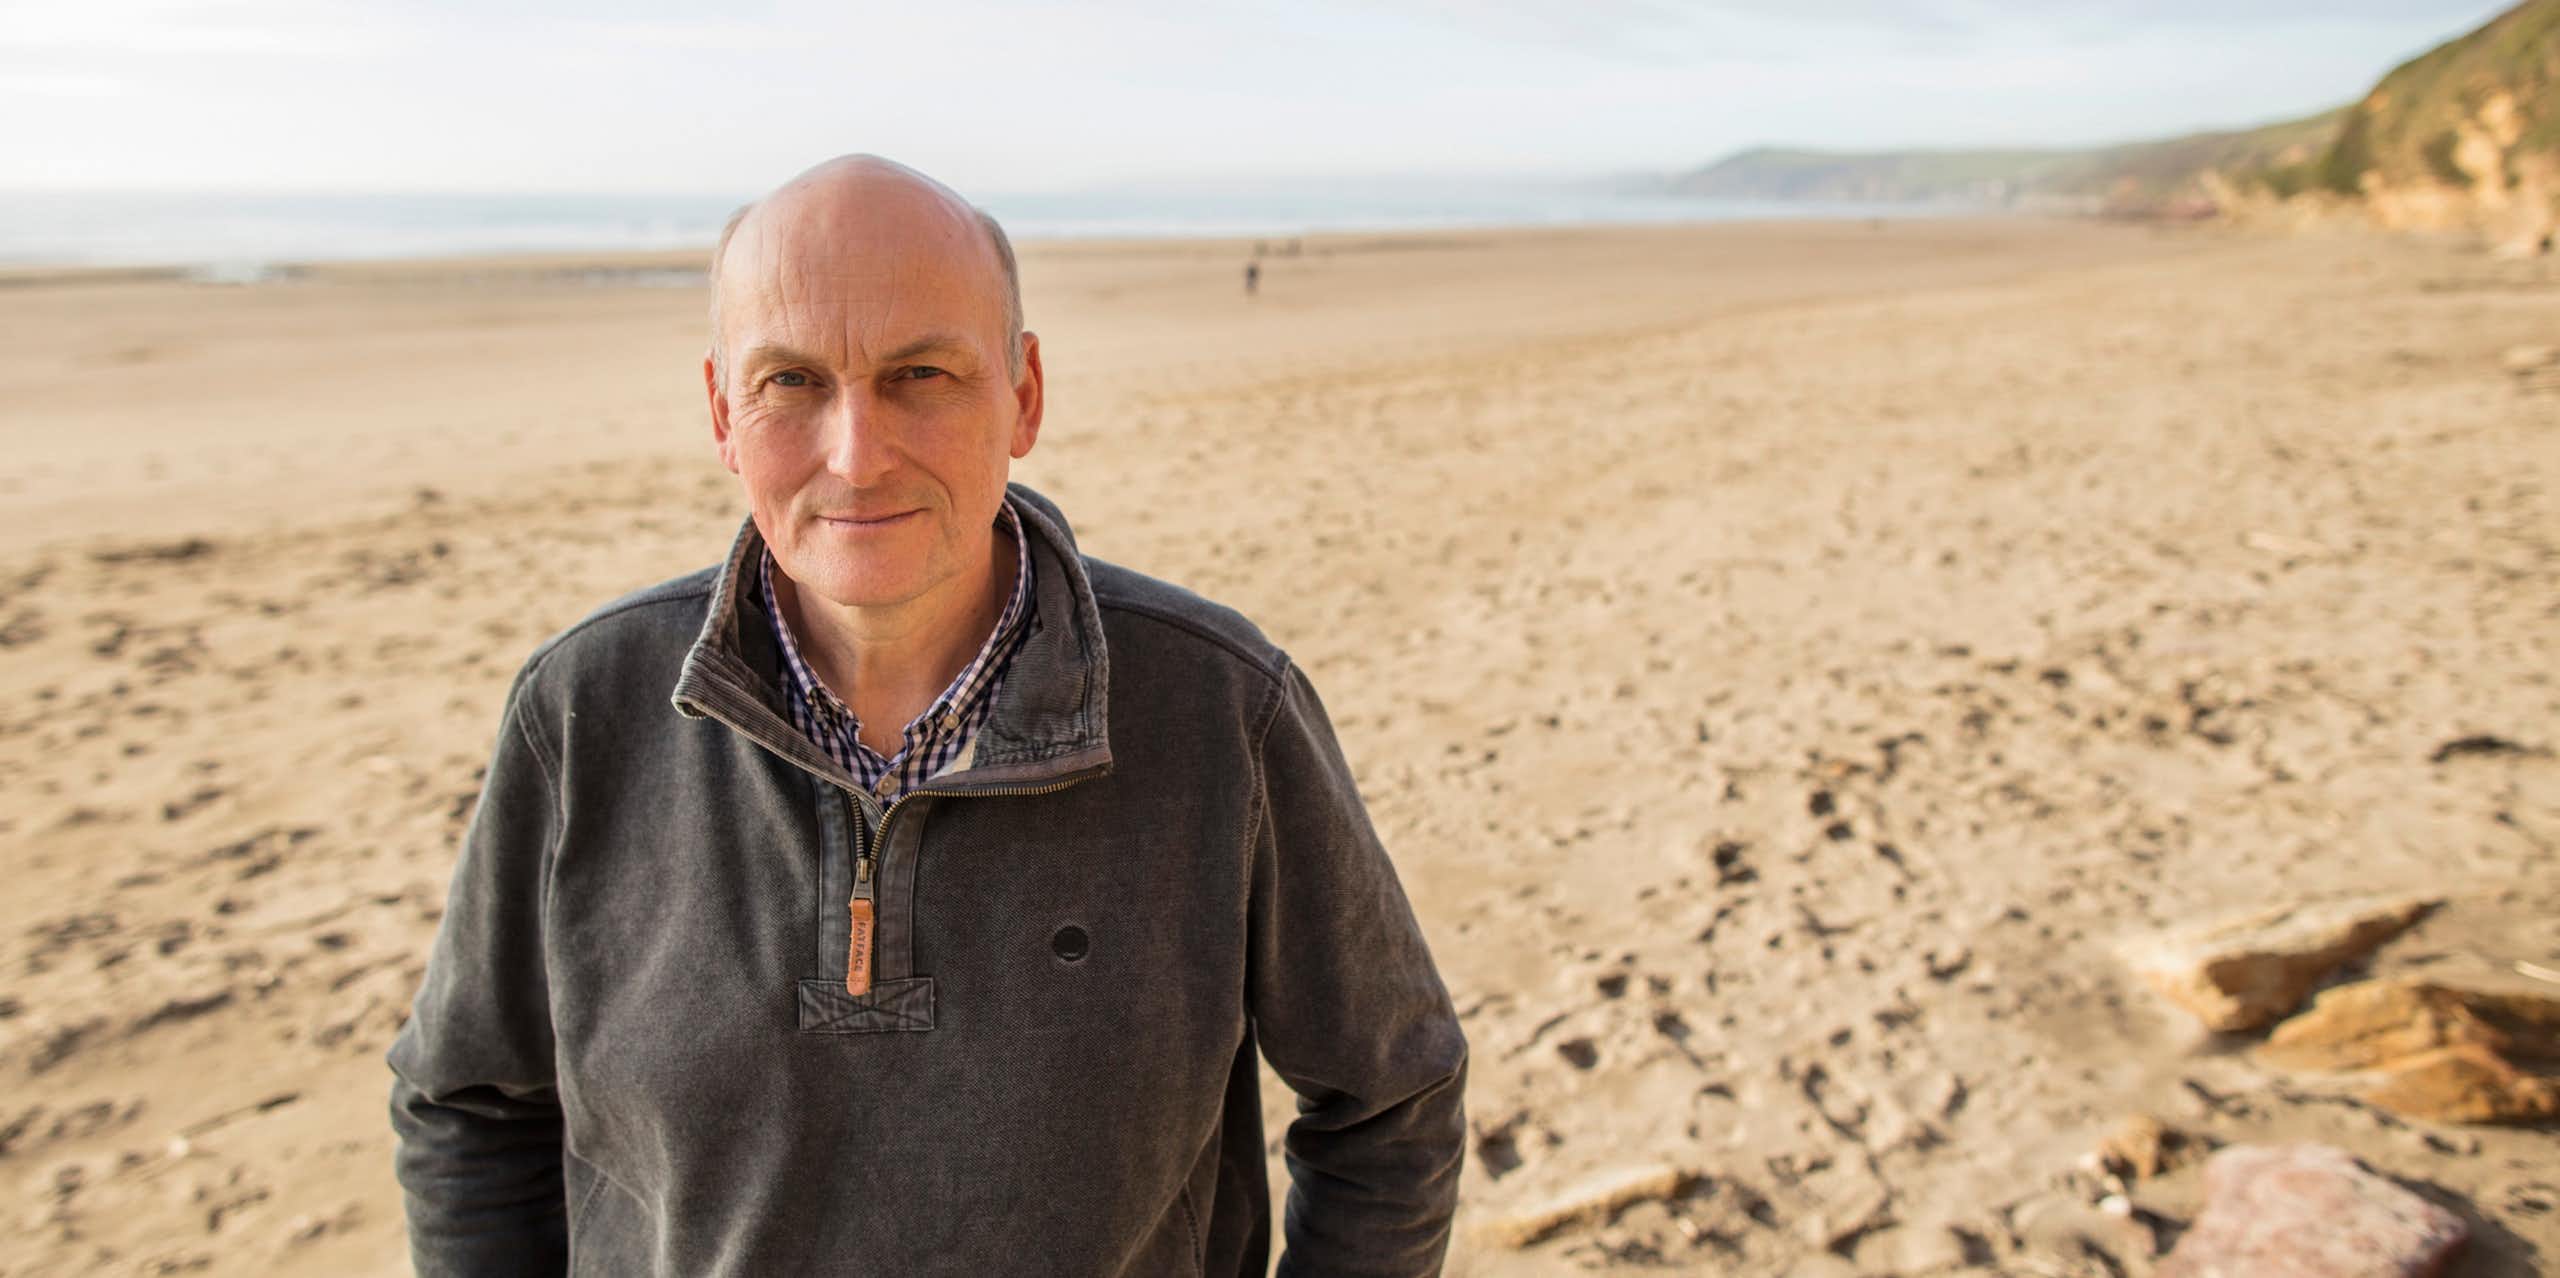 Man in grey jumper facing camera, wide empty sandy beach and sea in background